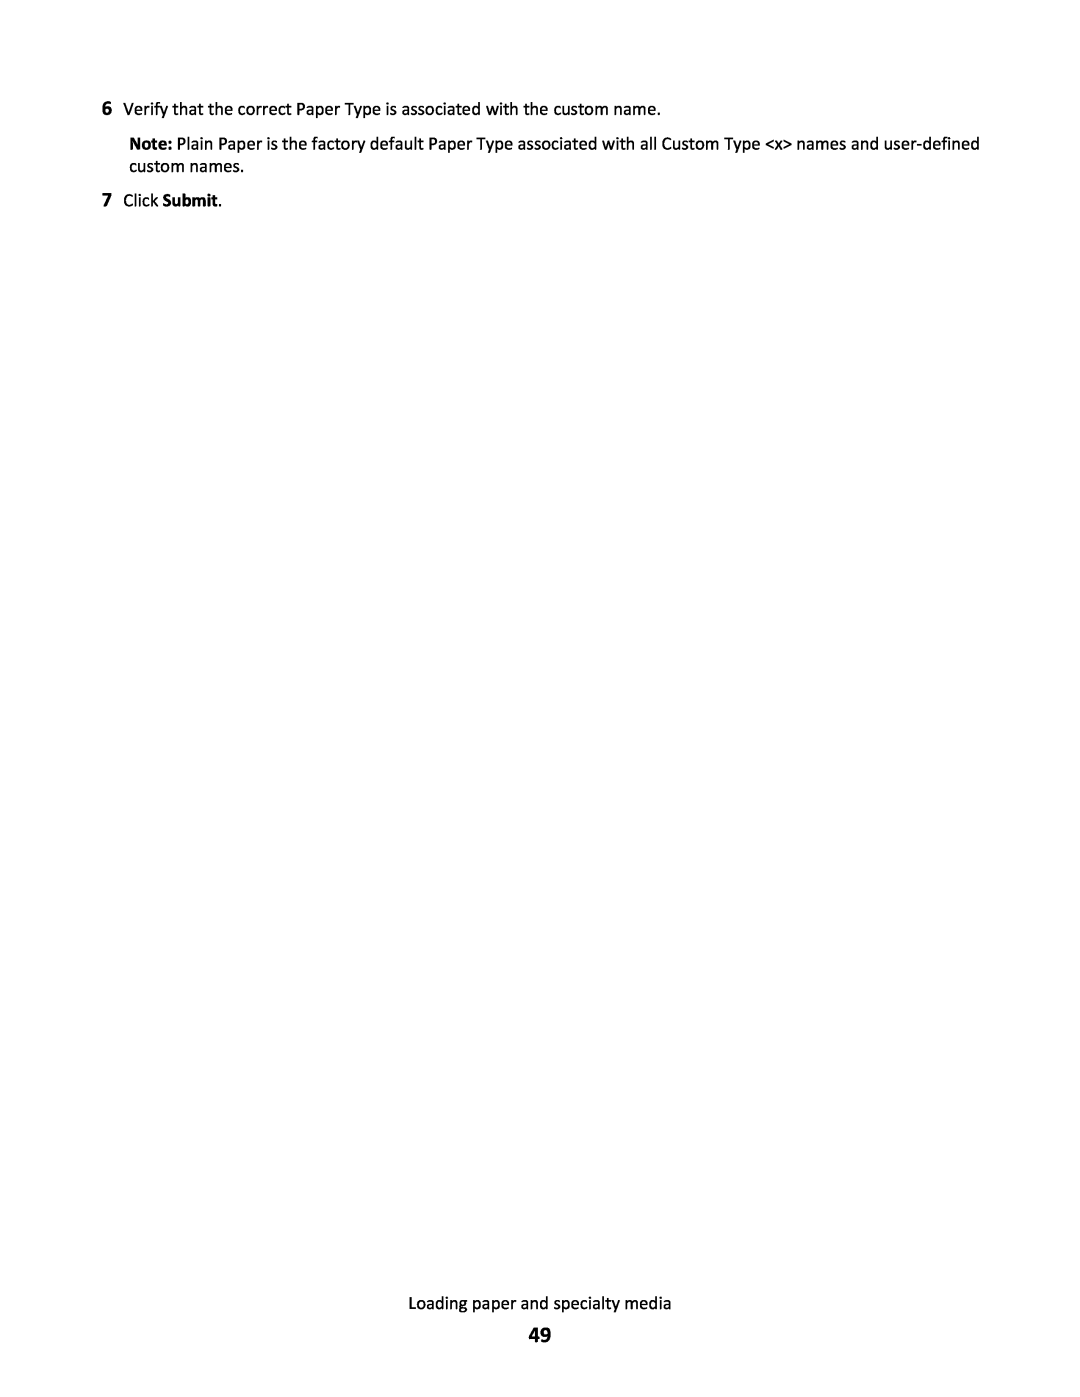 Lexmark 34S0305, 34S0100, 34S0300, 34S5164 manual Click Submit Loading paper and specialty media 